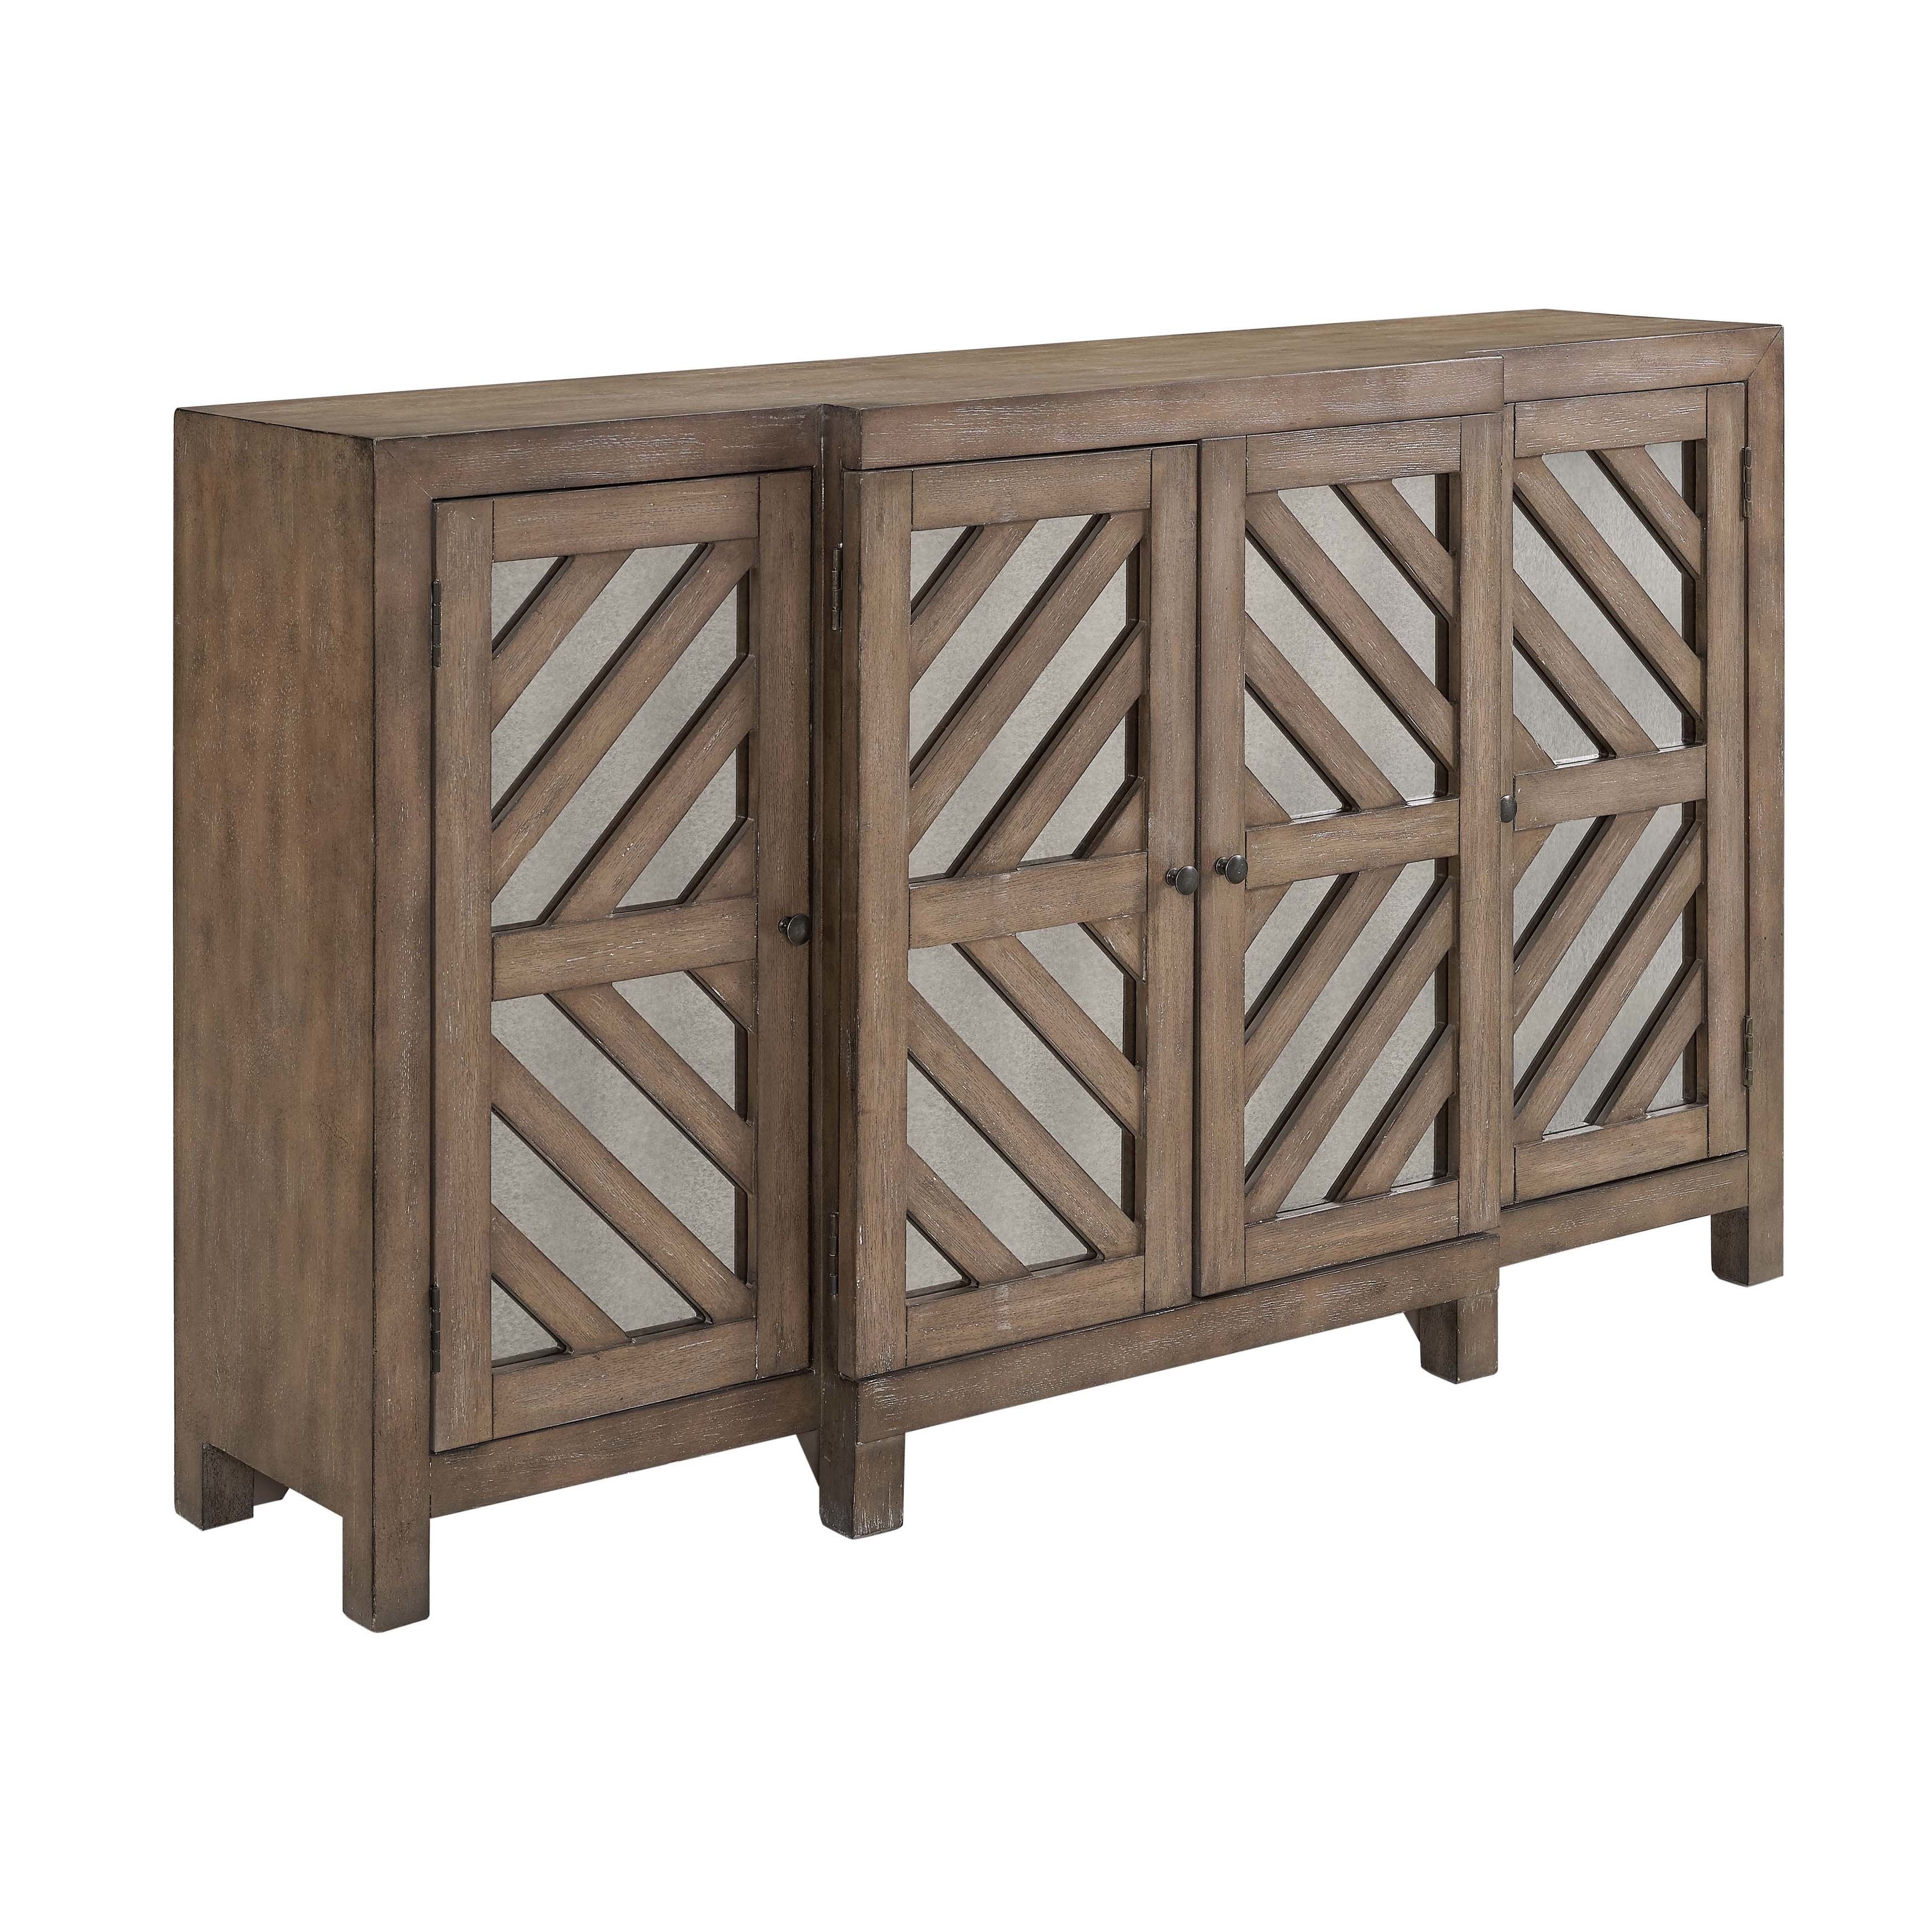 Farmhouse & Rustic Sideboards & Buffets | Birch Lane Inside Floral Beauty Credenzas (View 8 of 30)